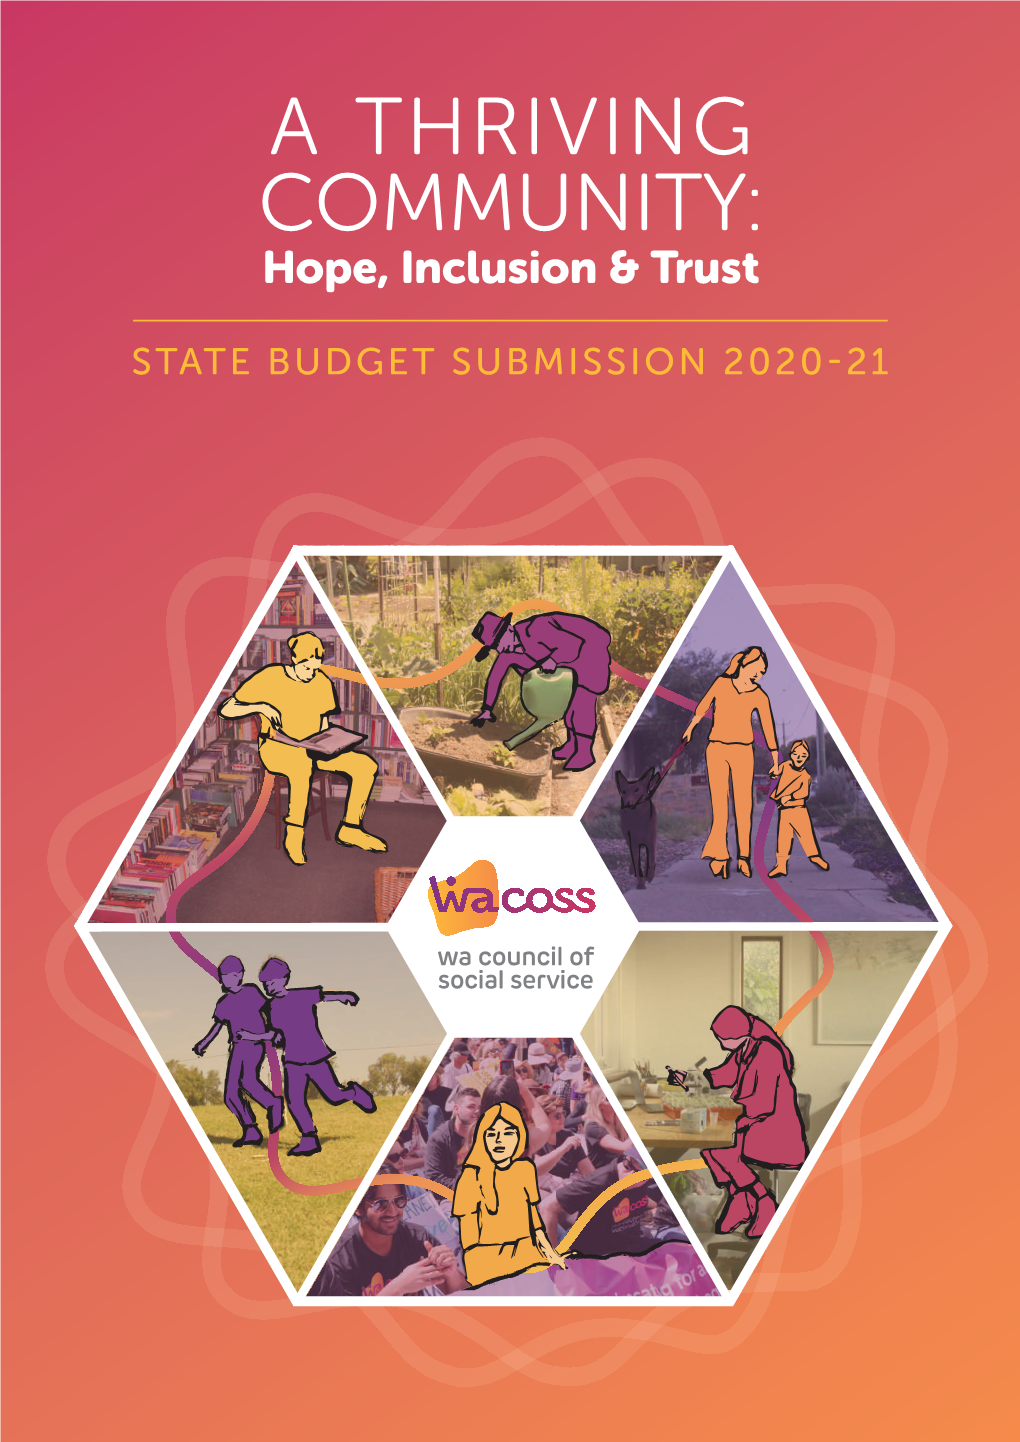 State Budget Submission 2020-2021